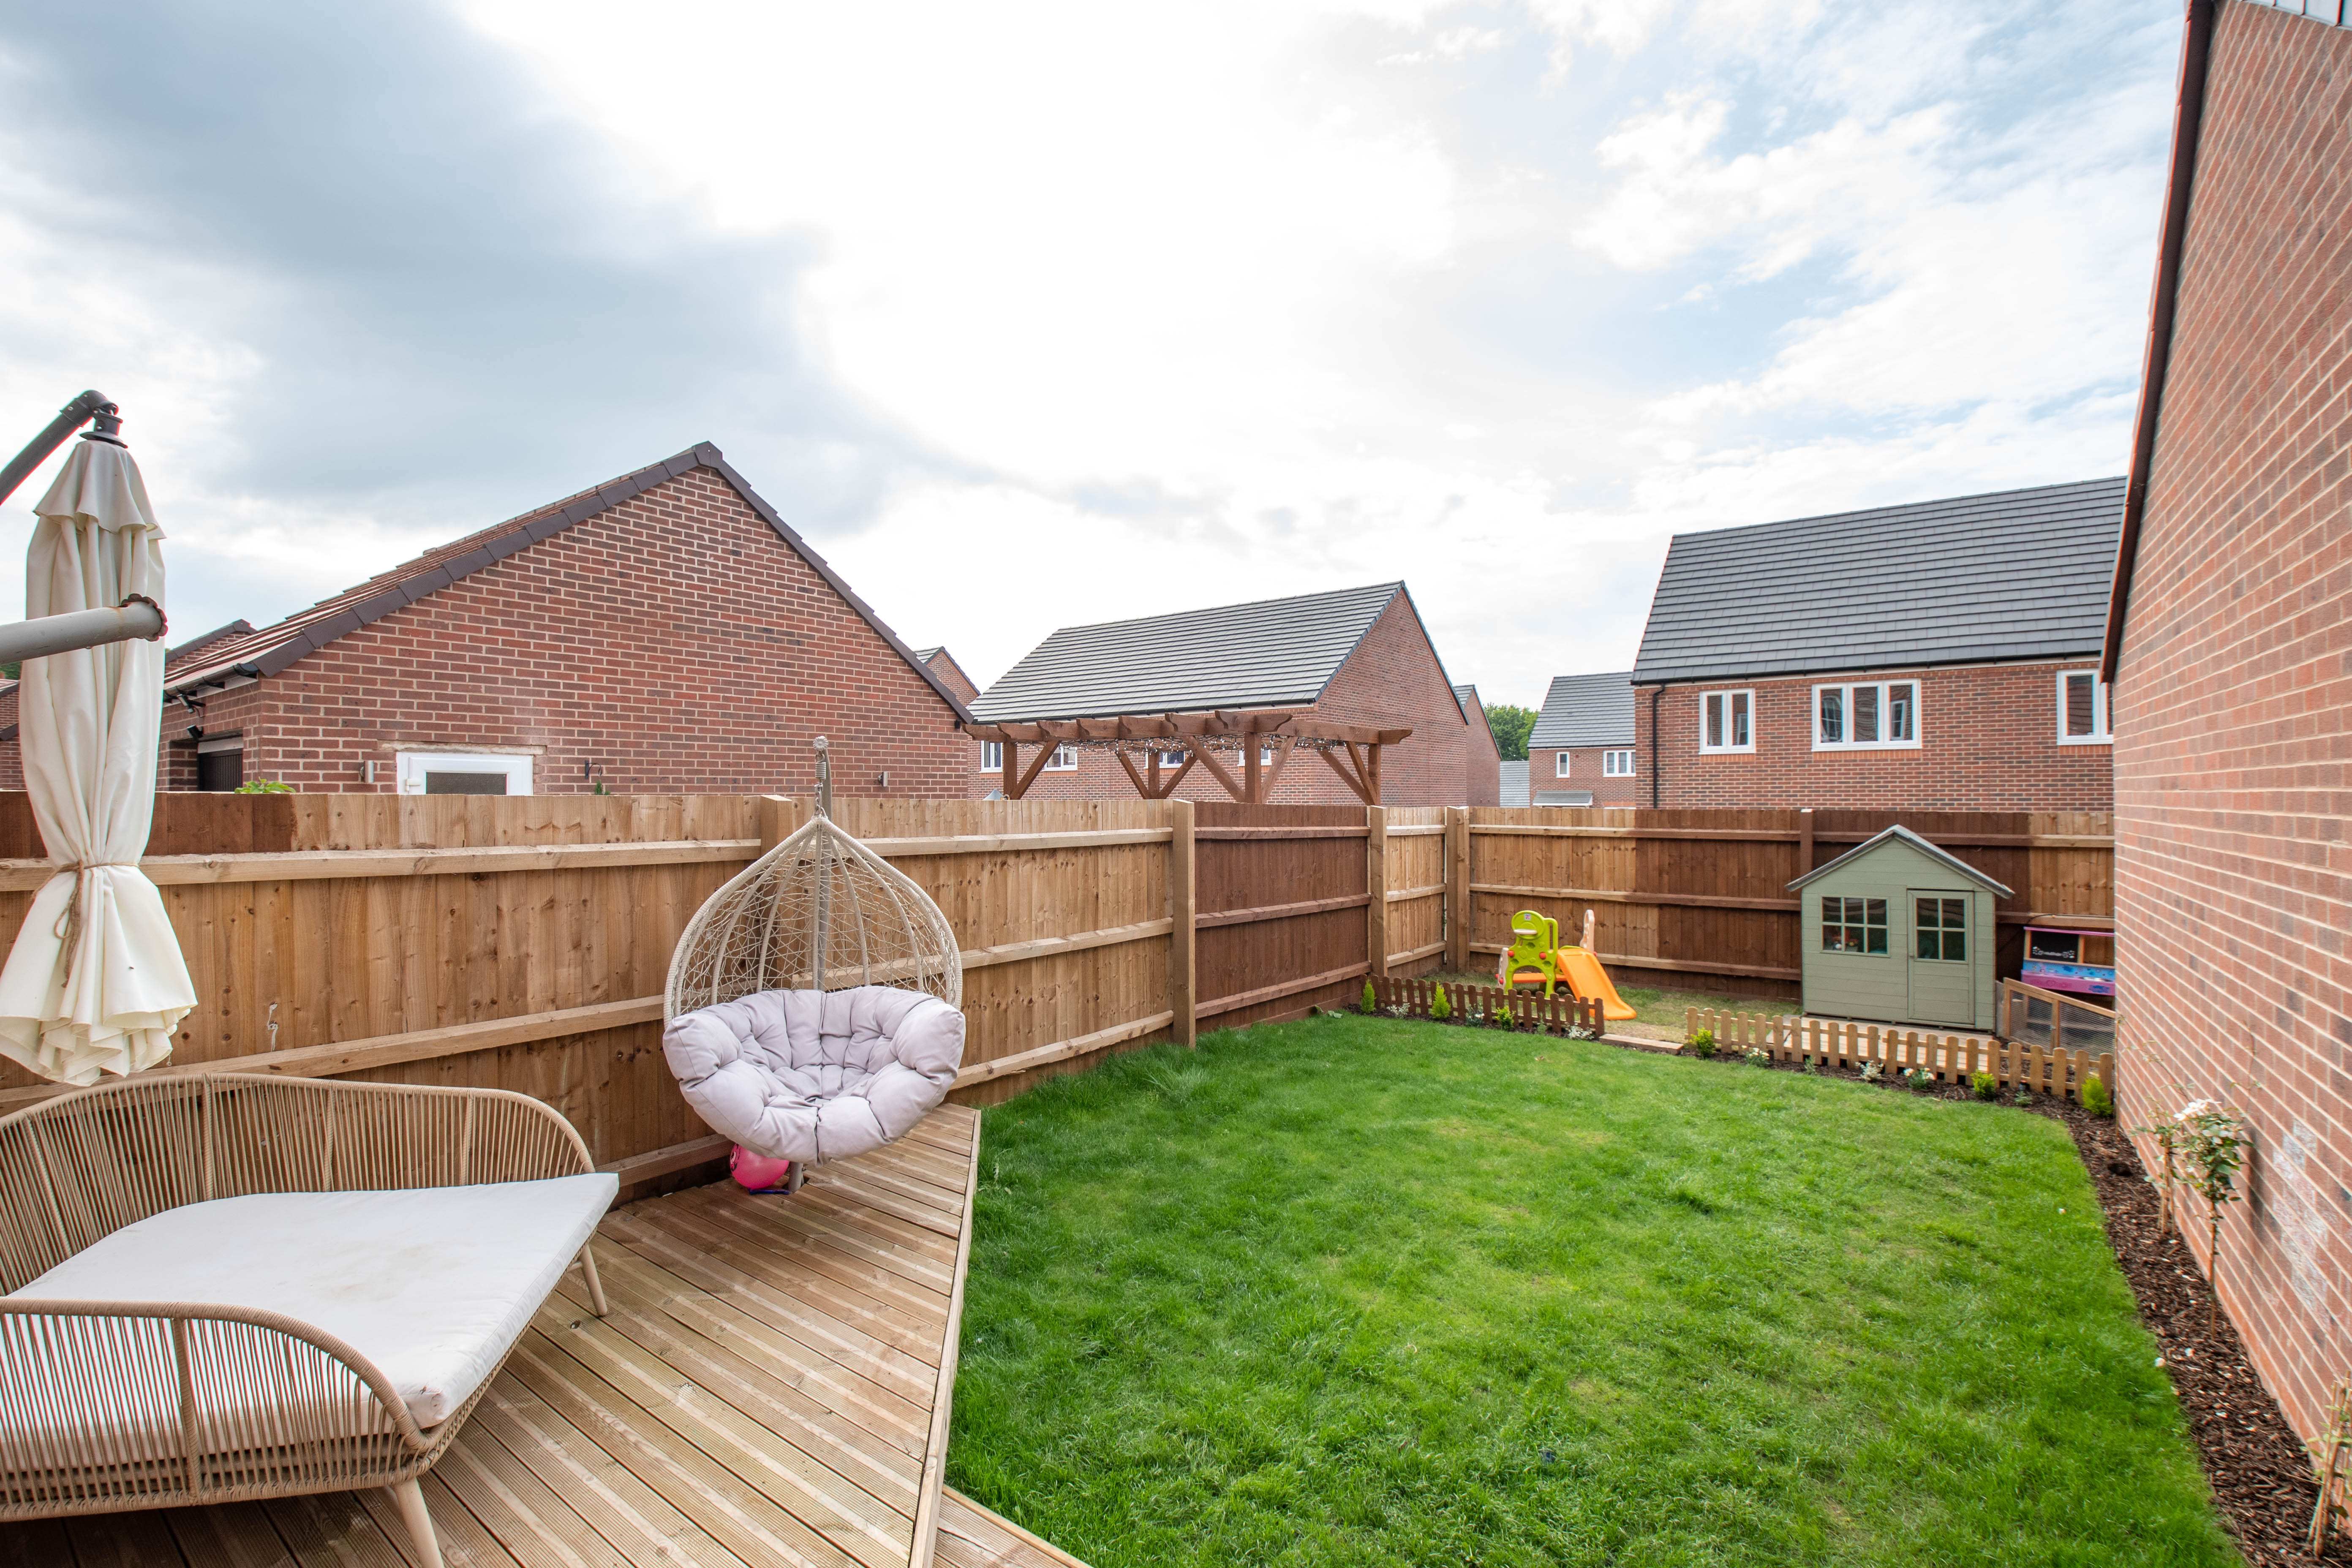 3 bed house for sale in Lea Castle Drive, Cookley 11